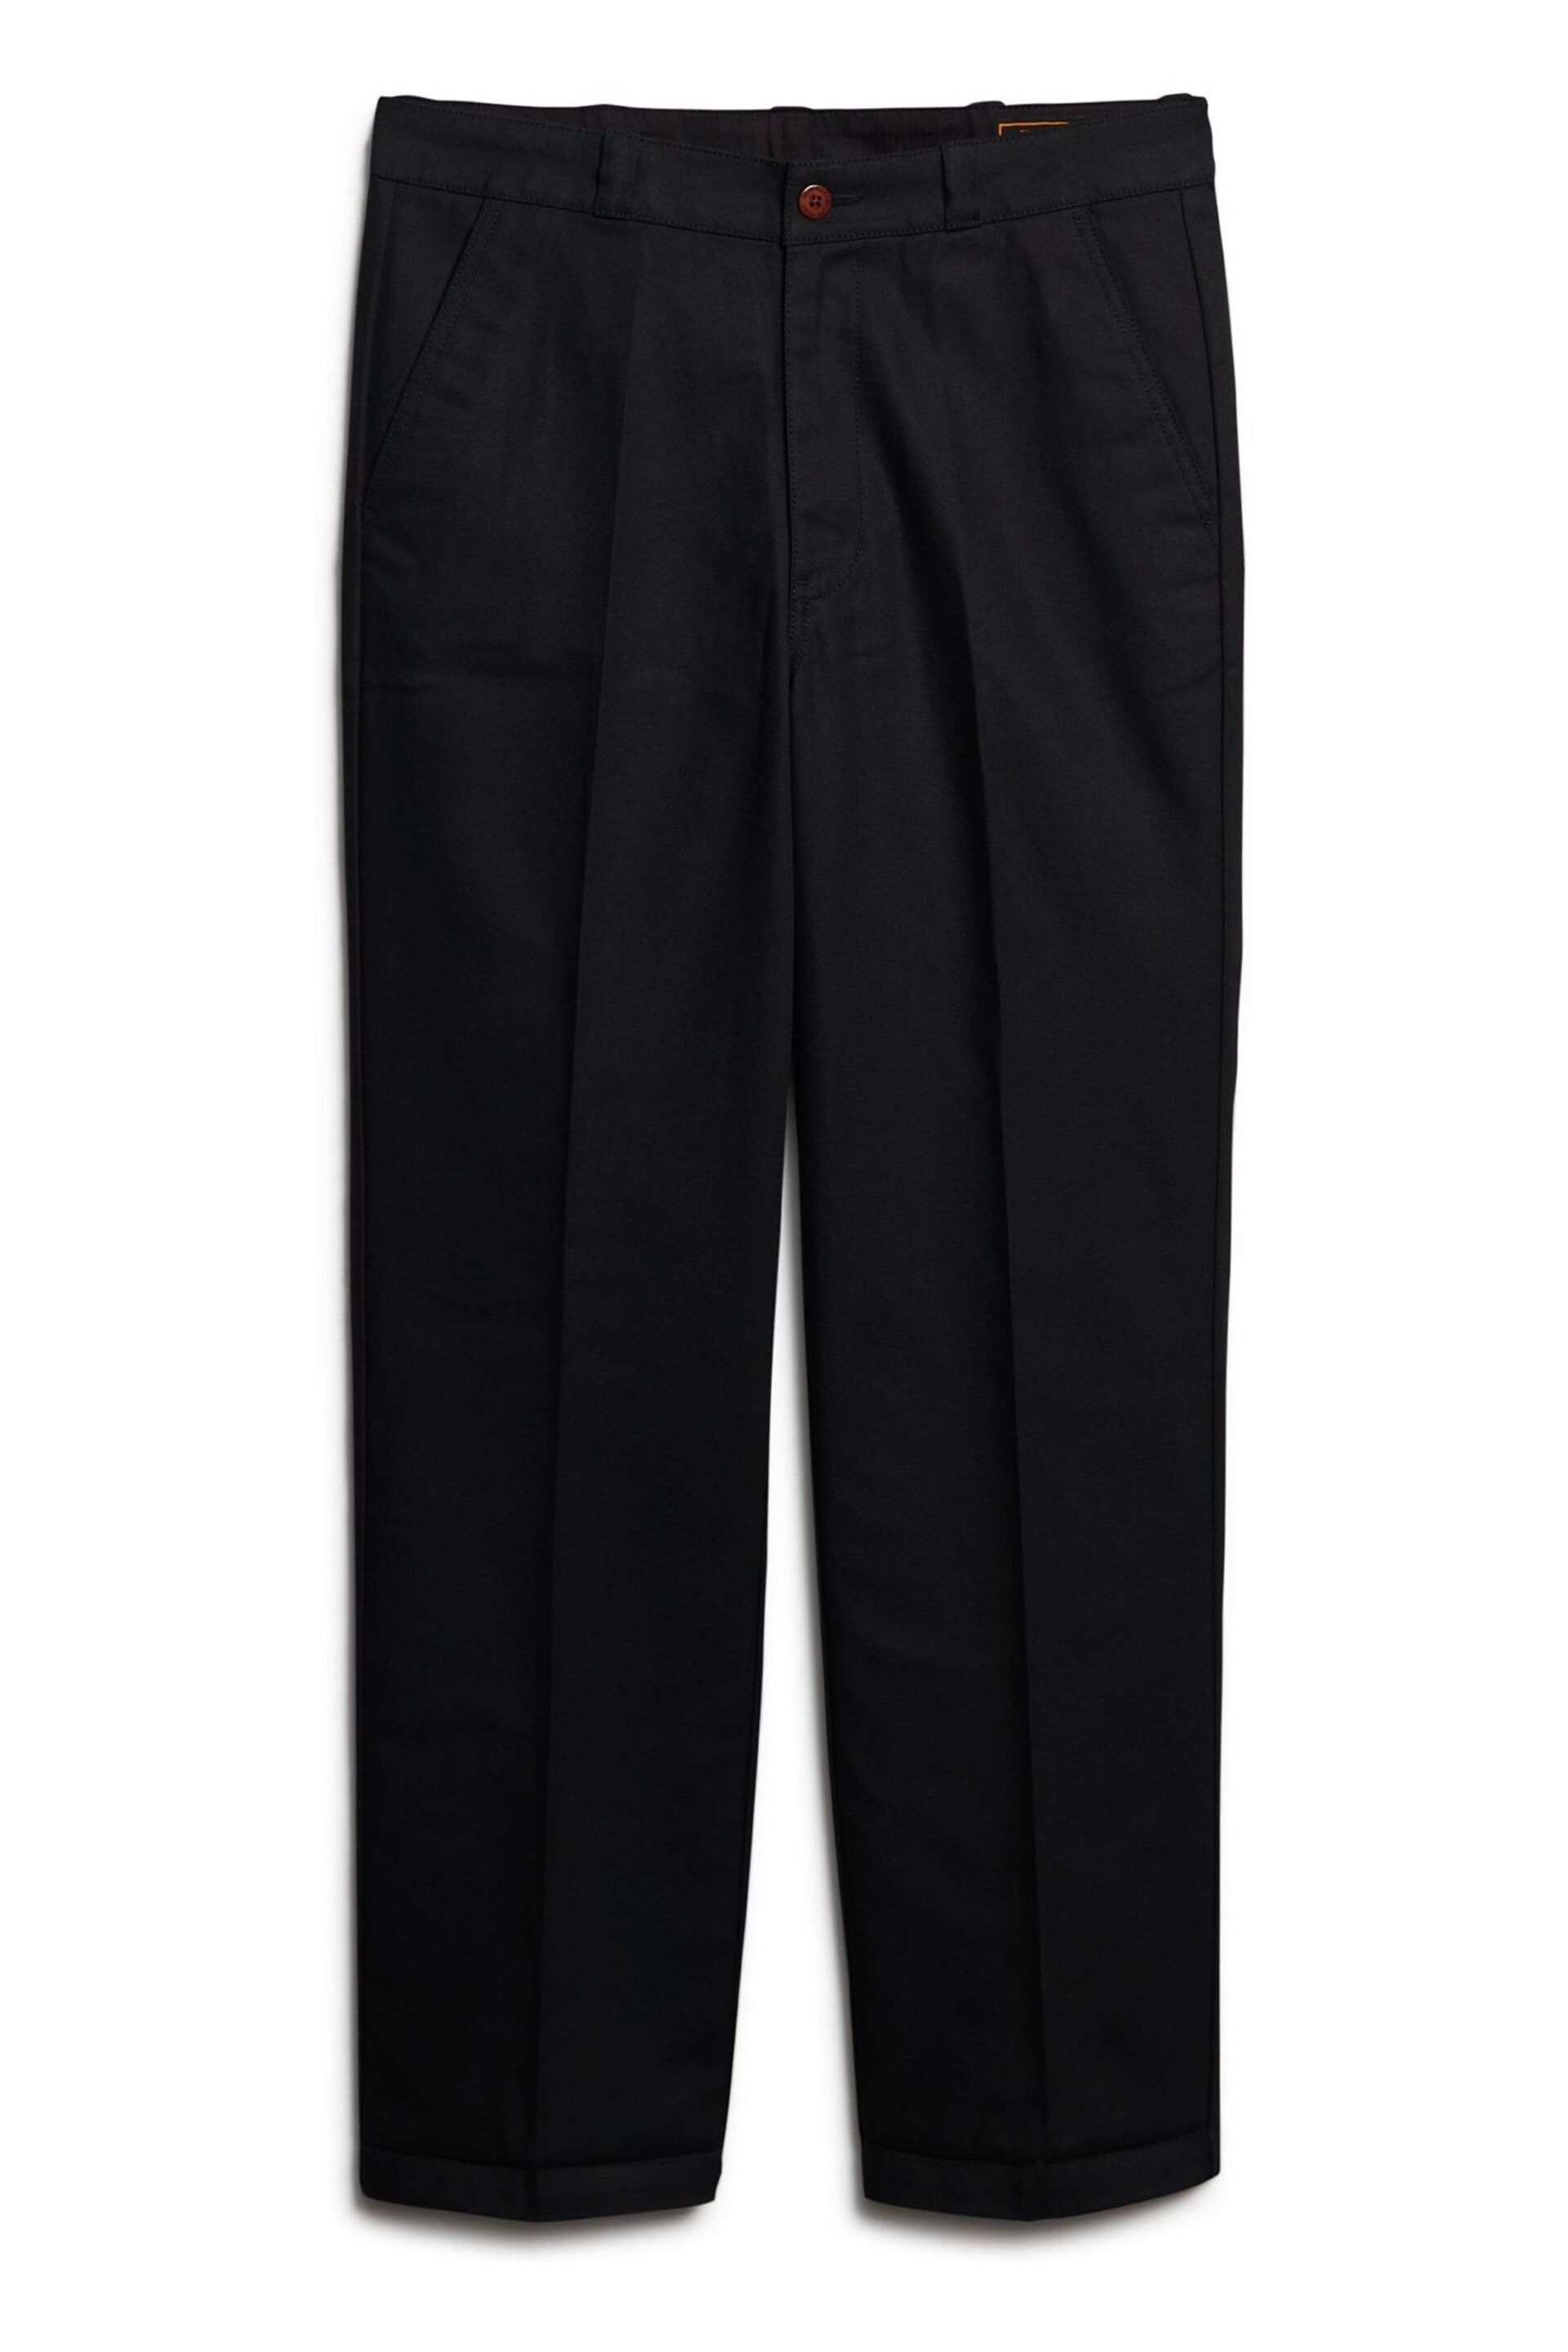 Superdry Black Straight Chinos Trousers - Image 5 of 7